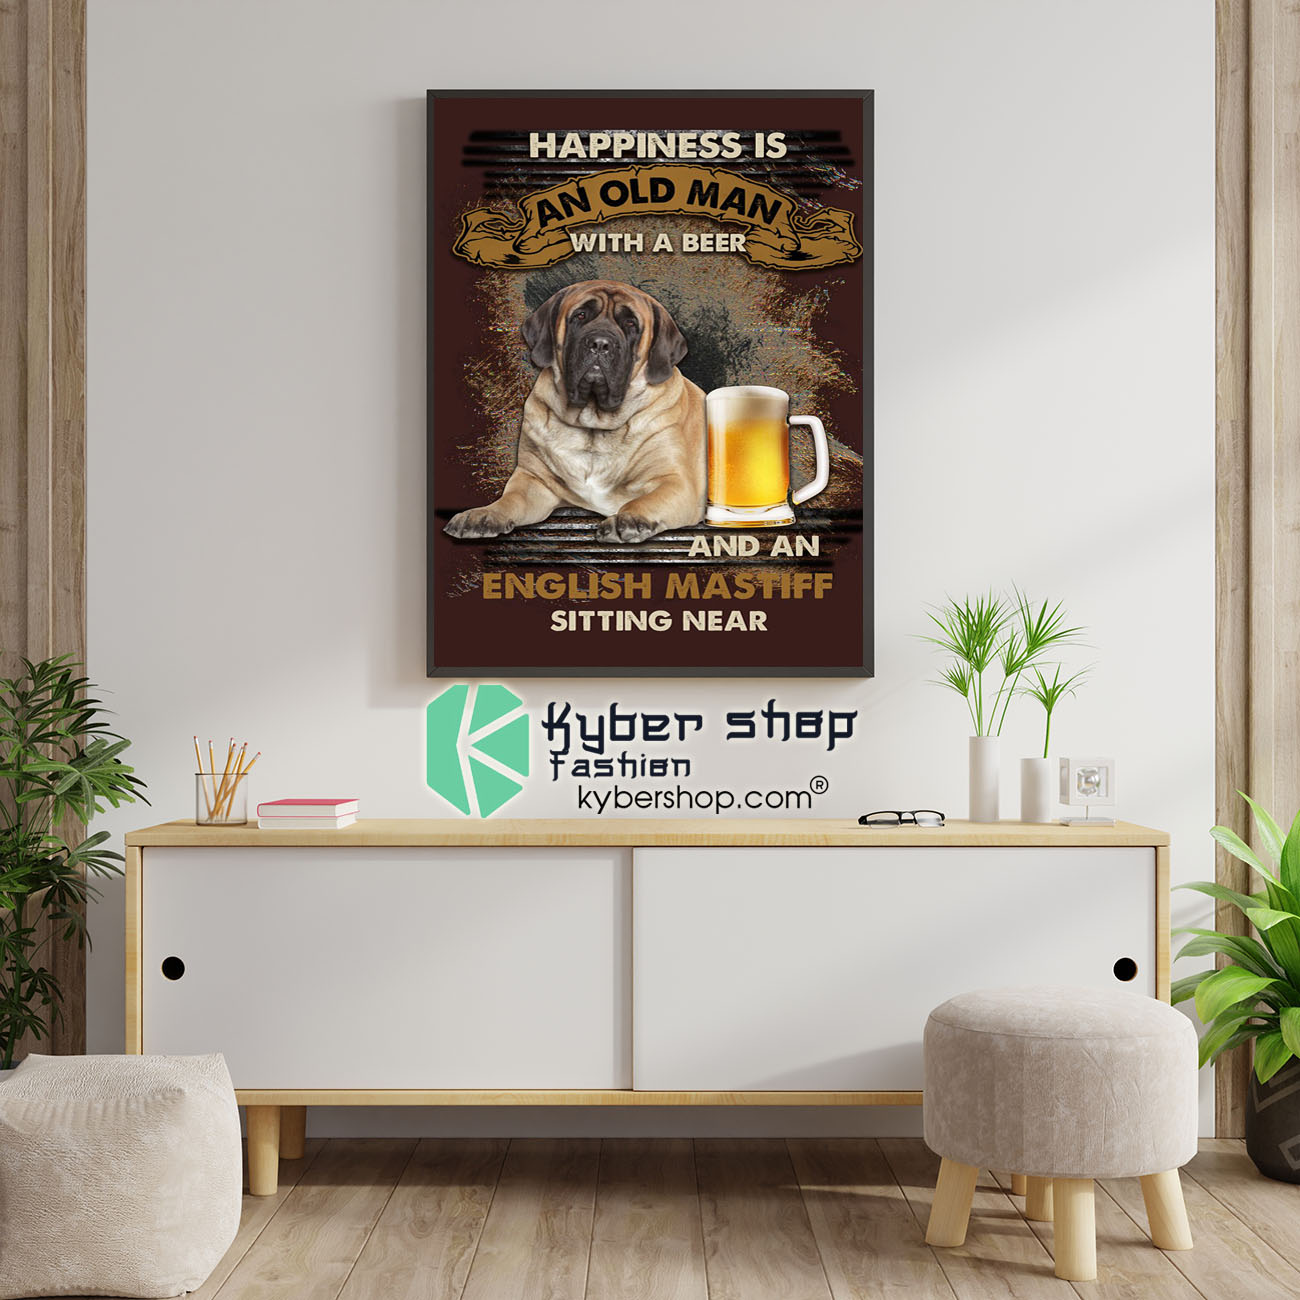 Happiness is an old man with a beer and an english mastiff sitting near poster 1